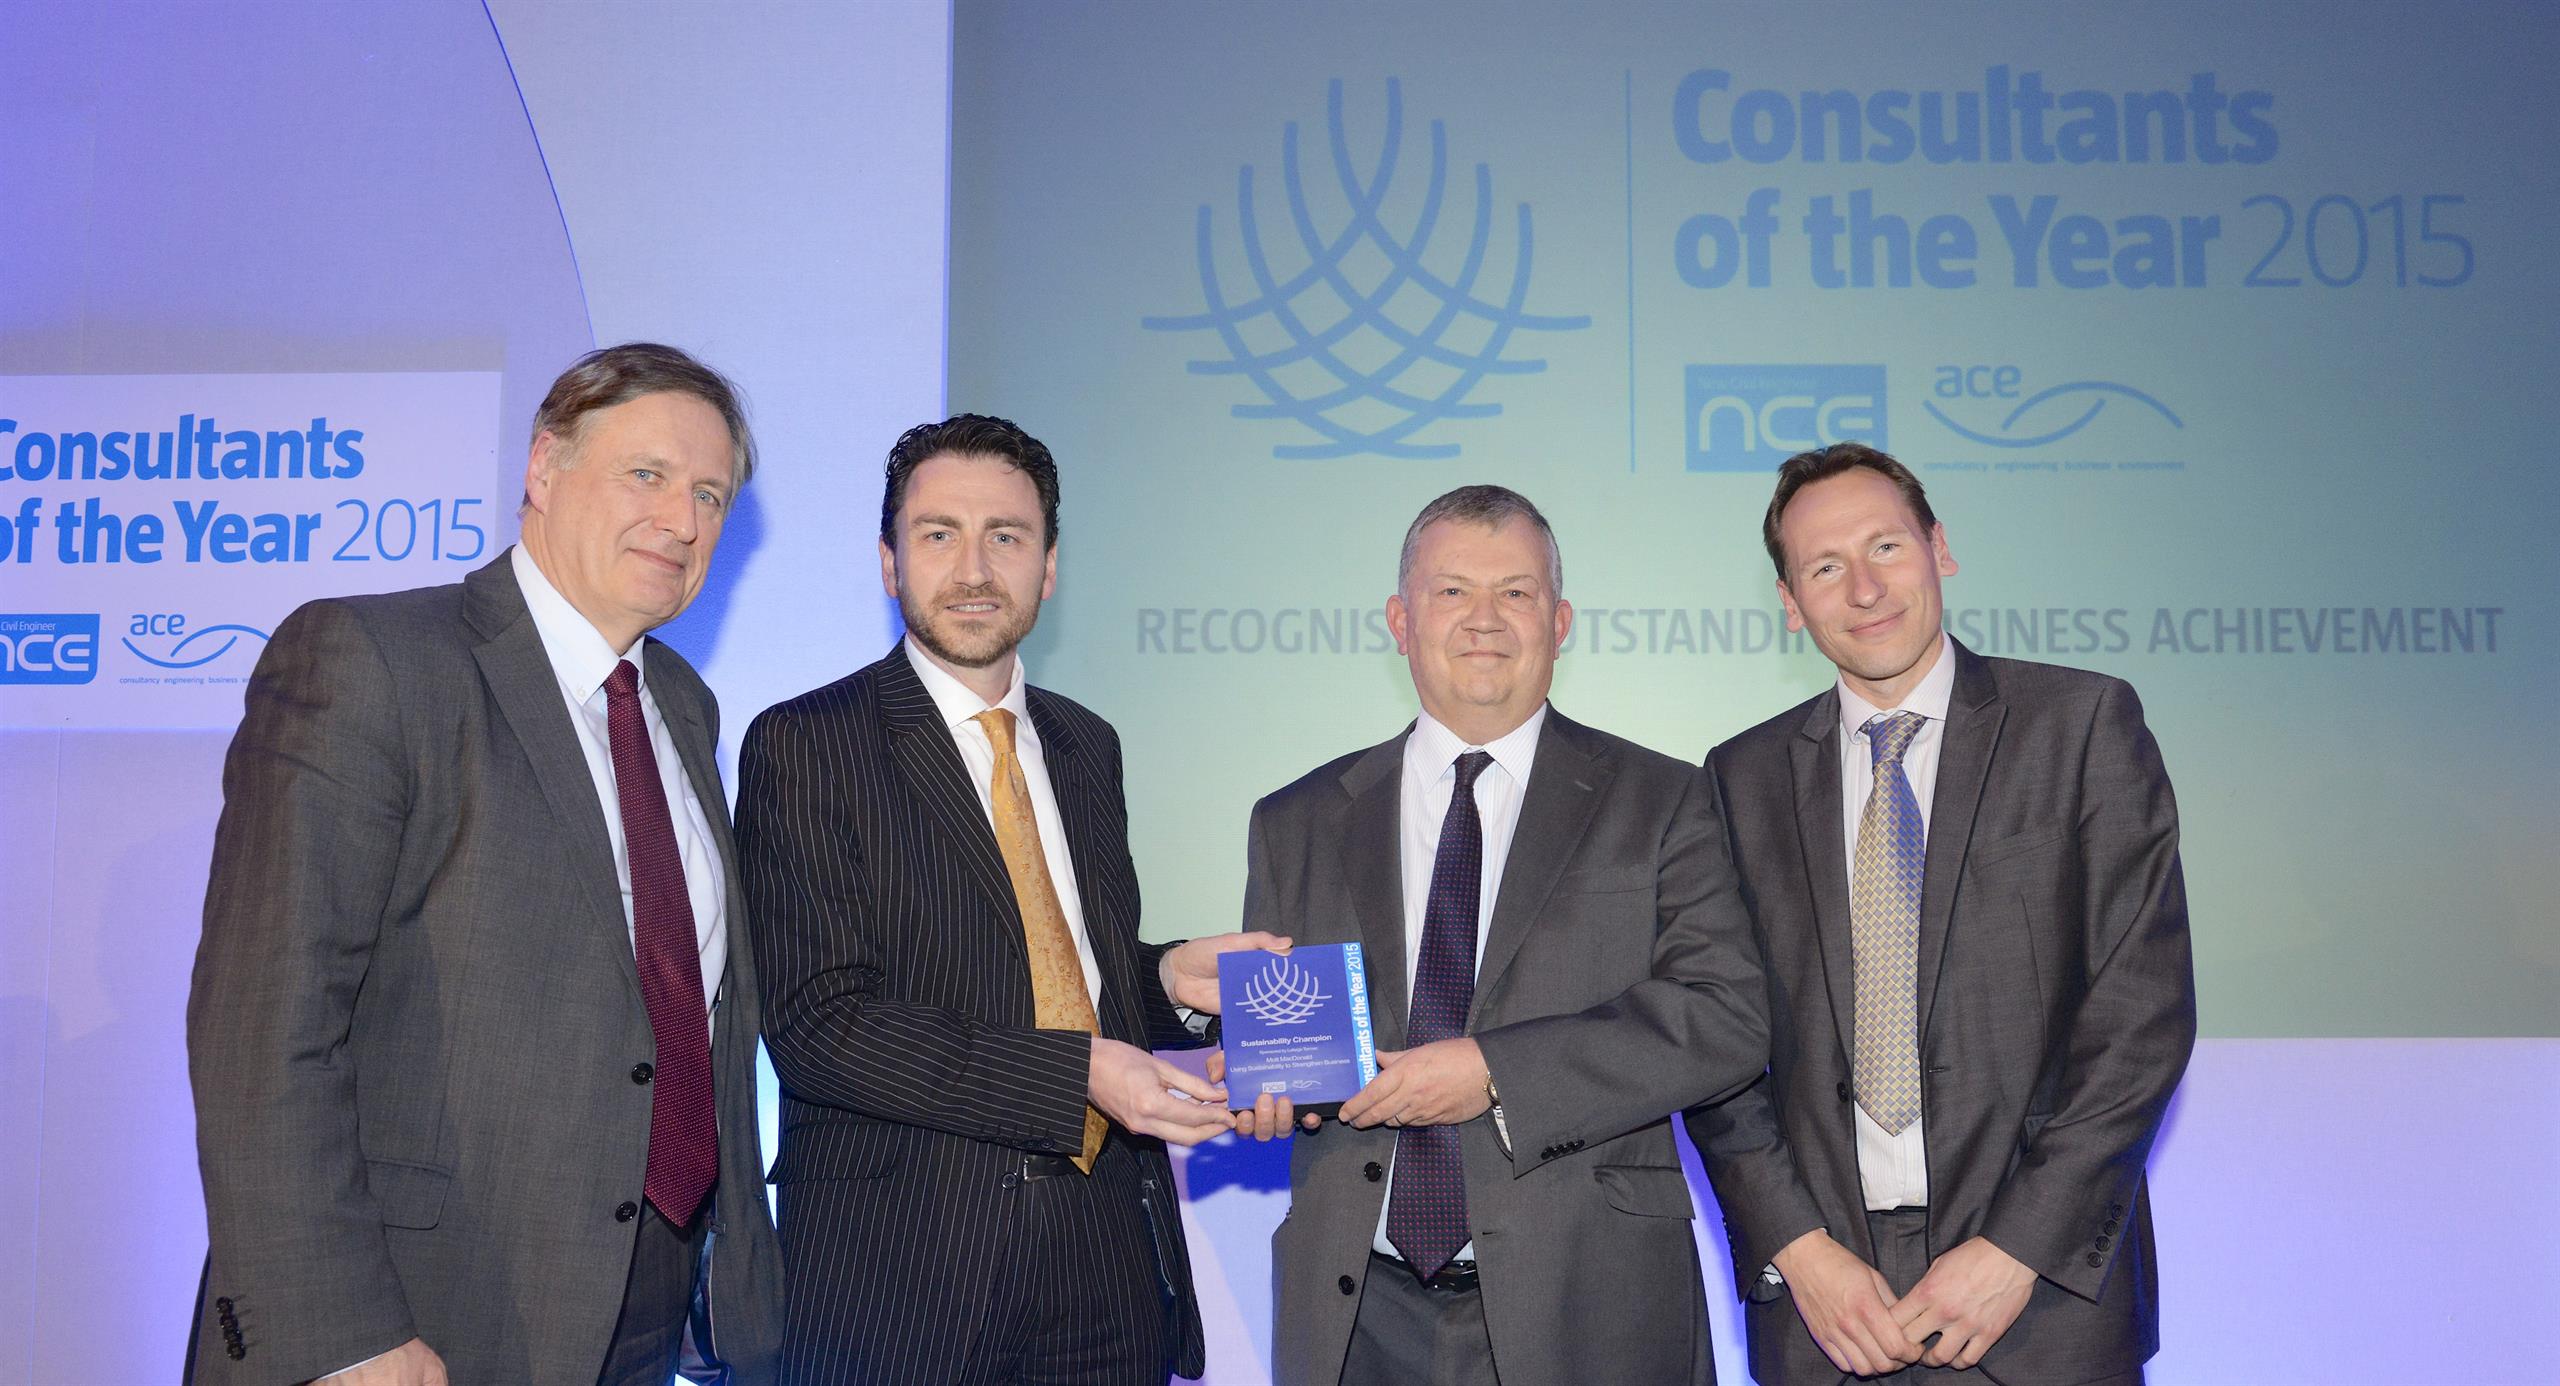 Our staff collecting the award